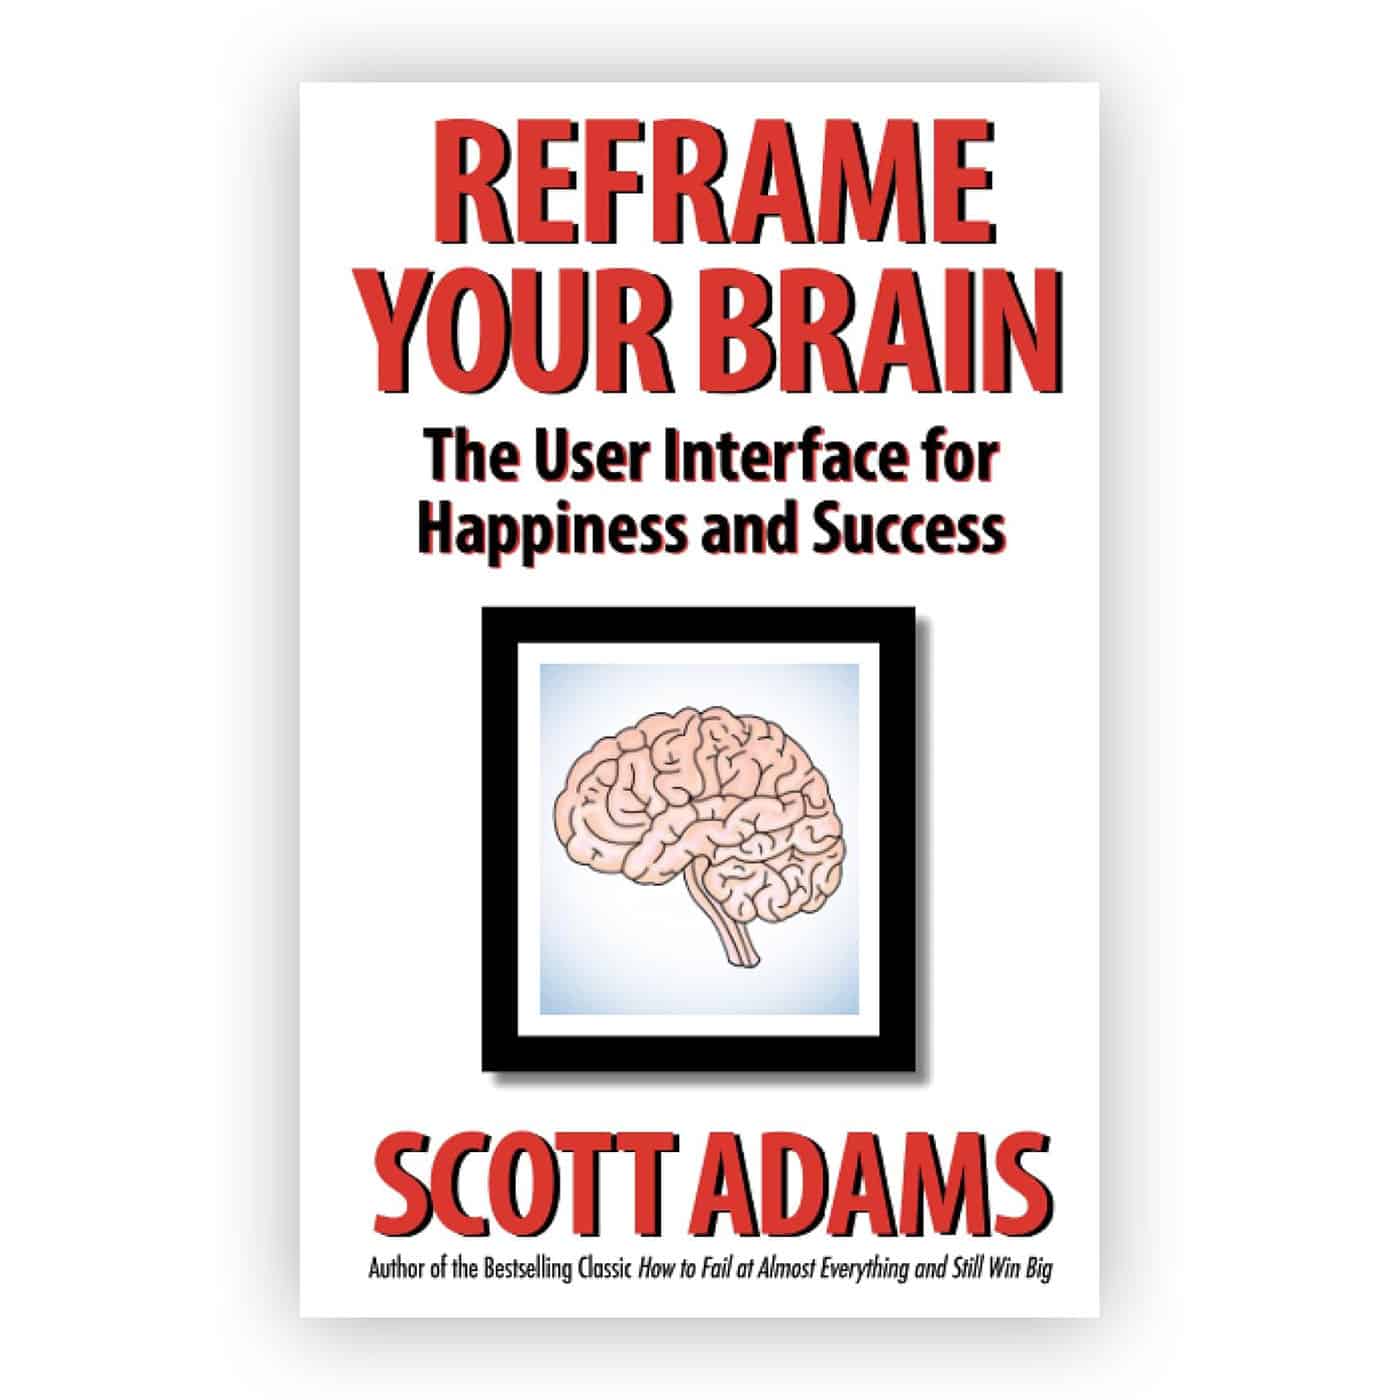 Reframe Your Brain: The User Interface for Happiness and Success